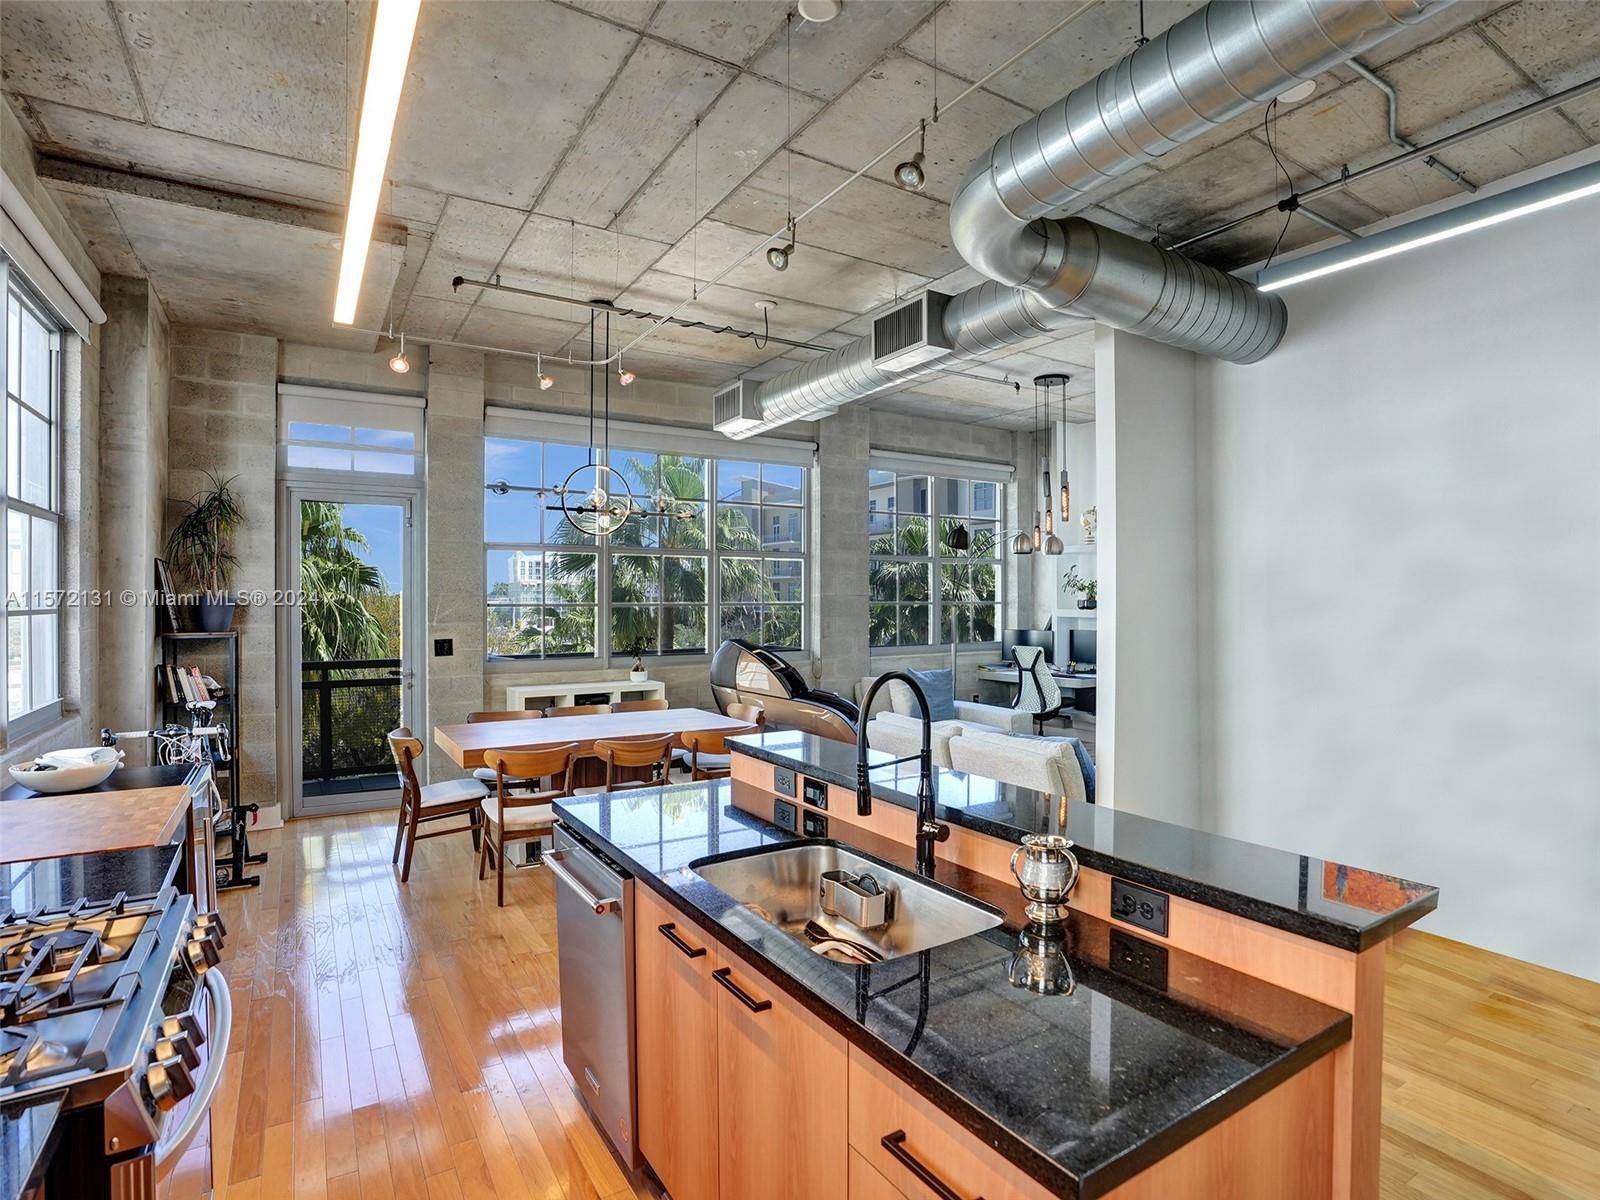 The NYC style loft in FAT Village Flagler Village is a sought after living space offering a flexible floor plan, 2 bedroom 1 bath, 975 SQFT currently set up as ...